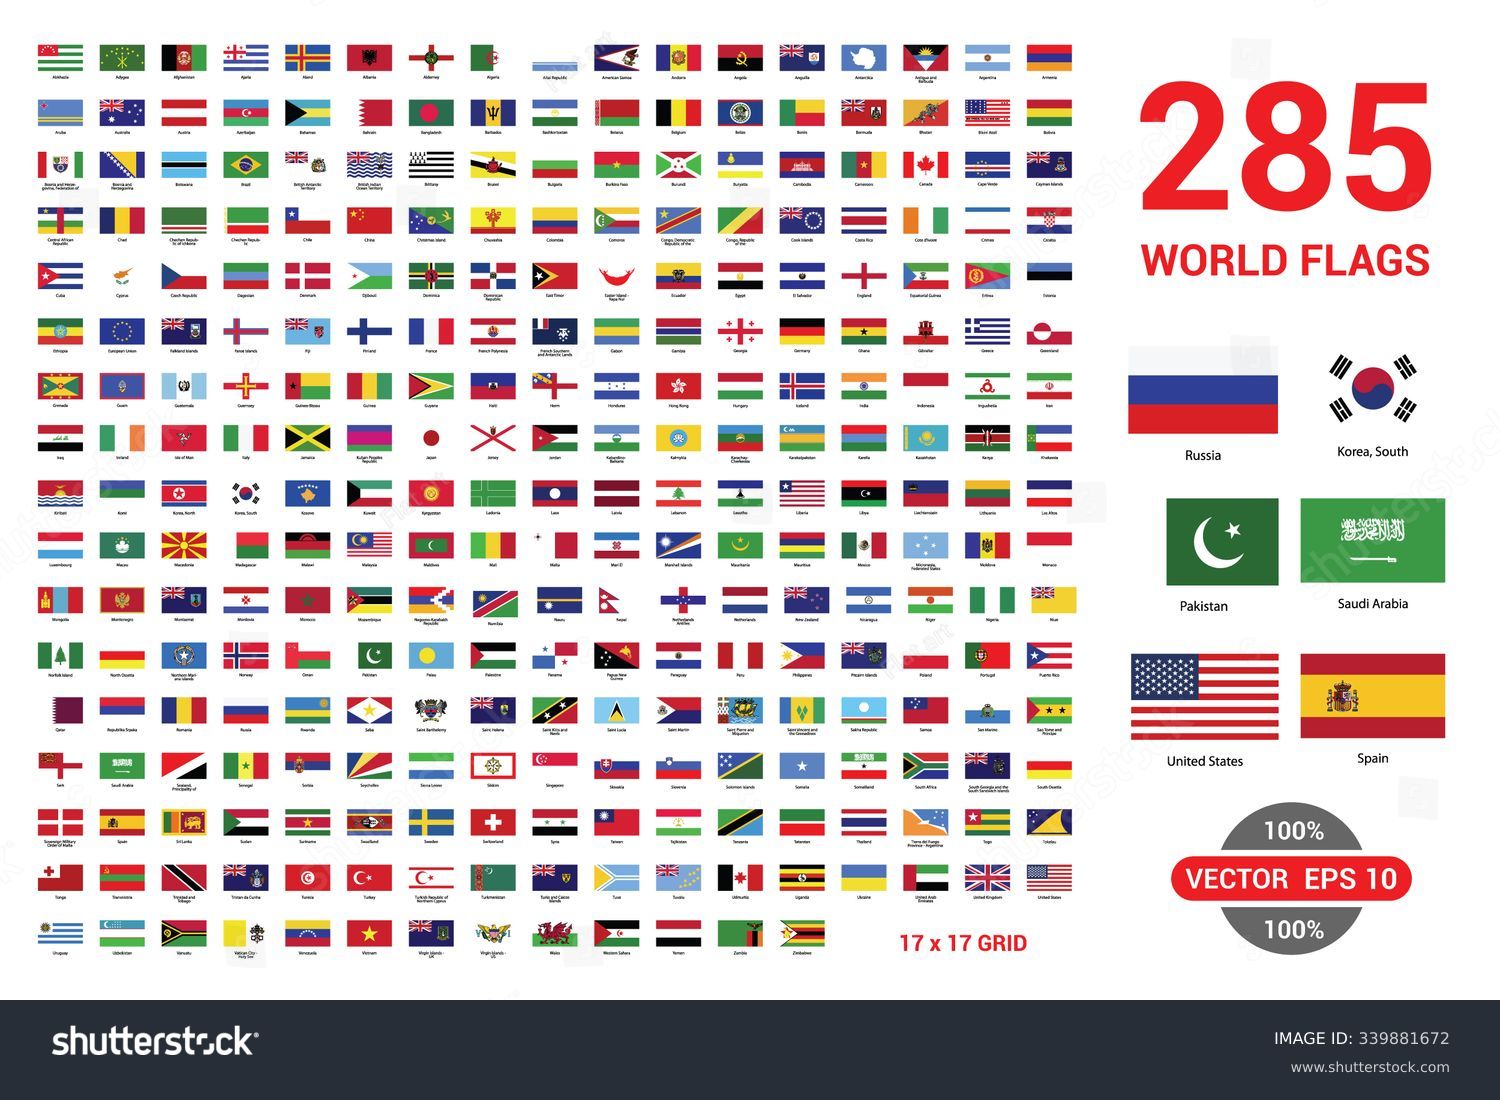 Flags vector of the world #339881672